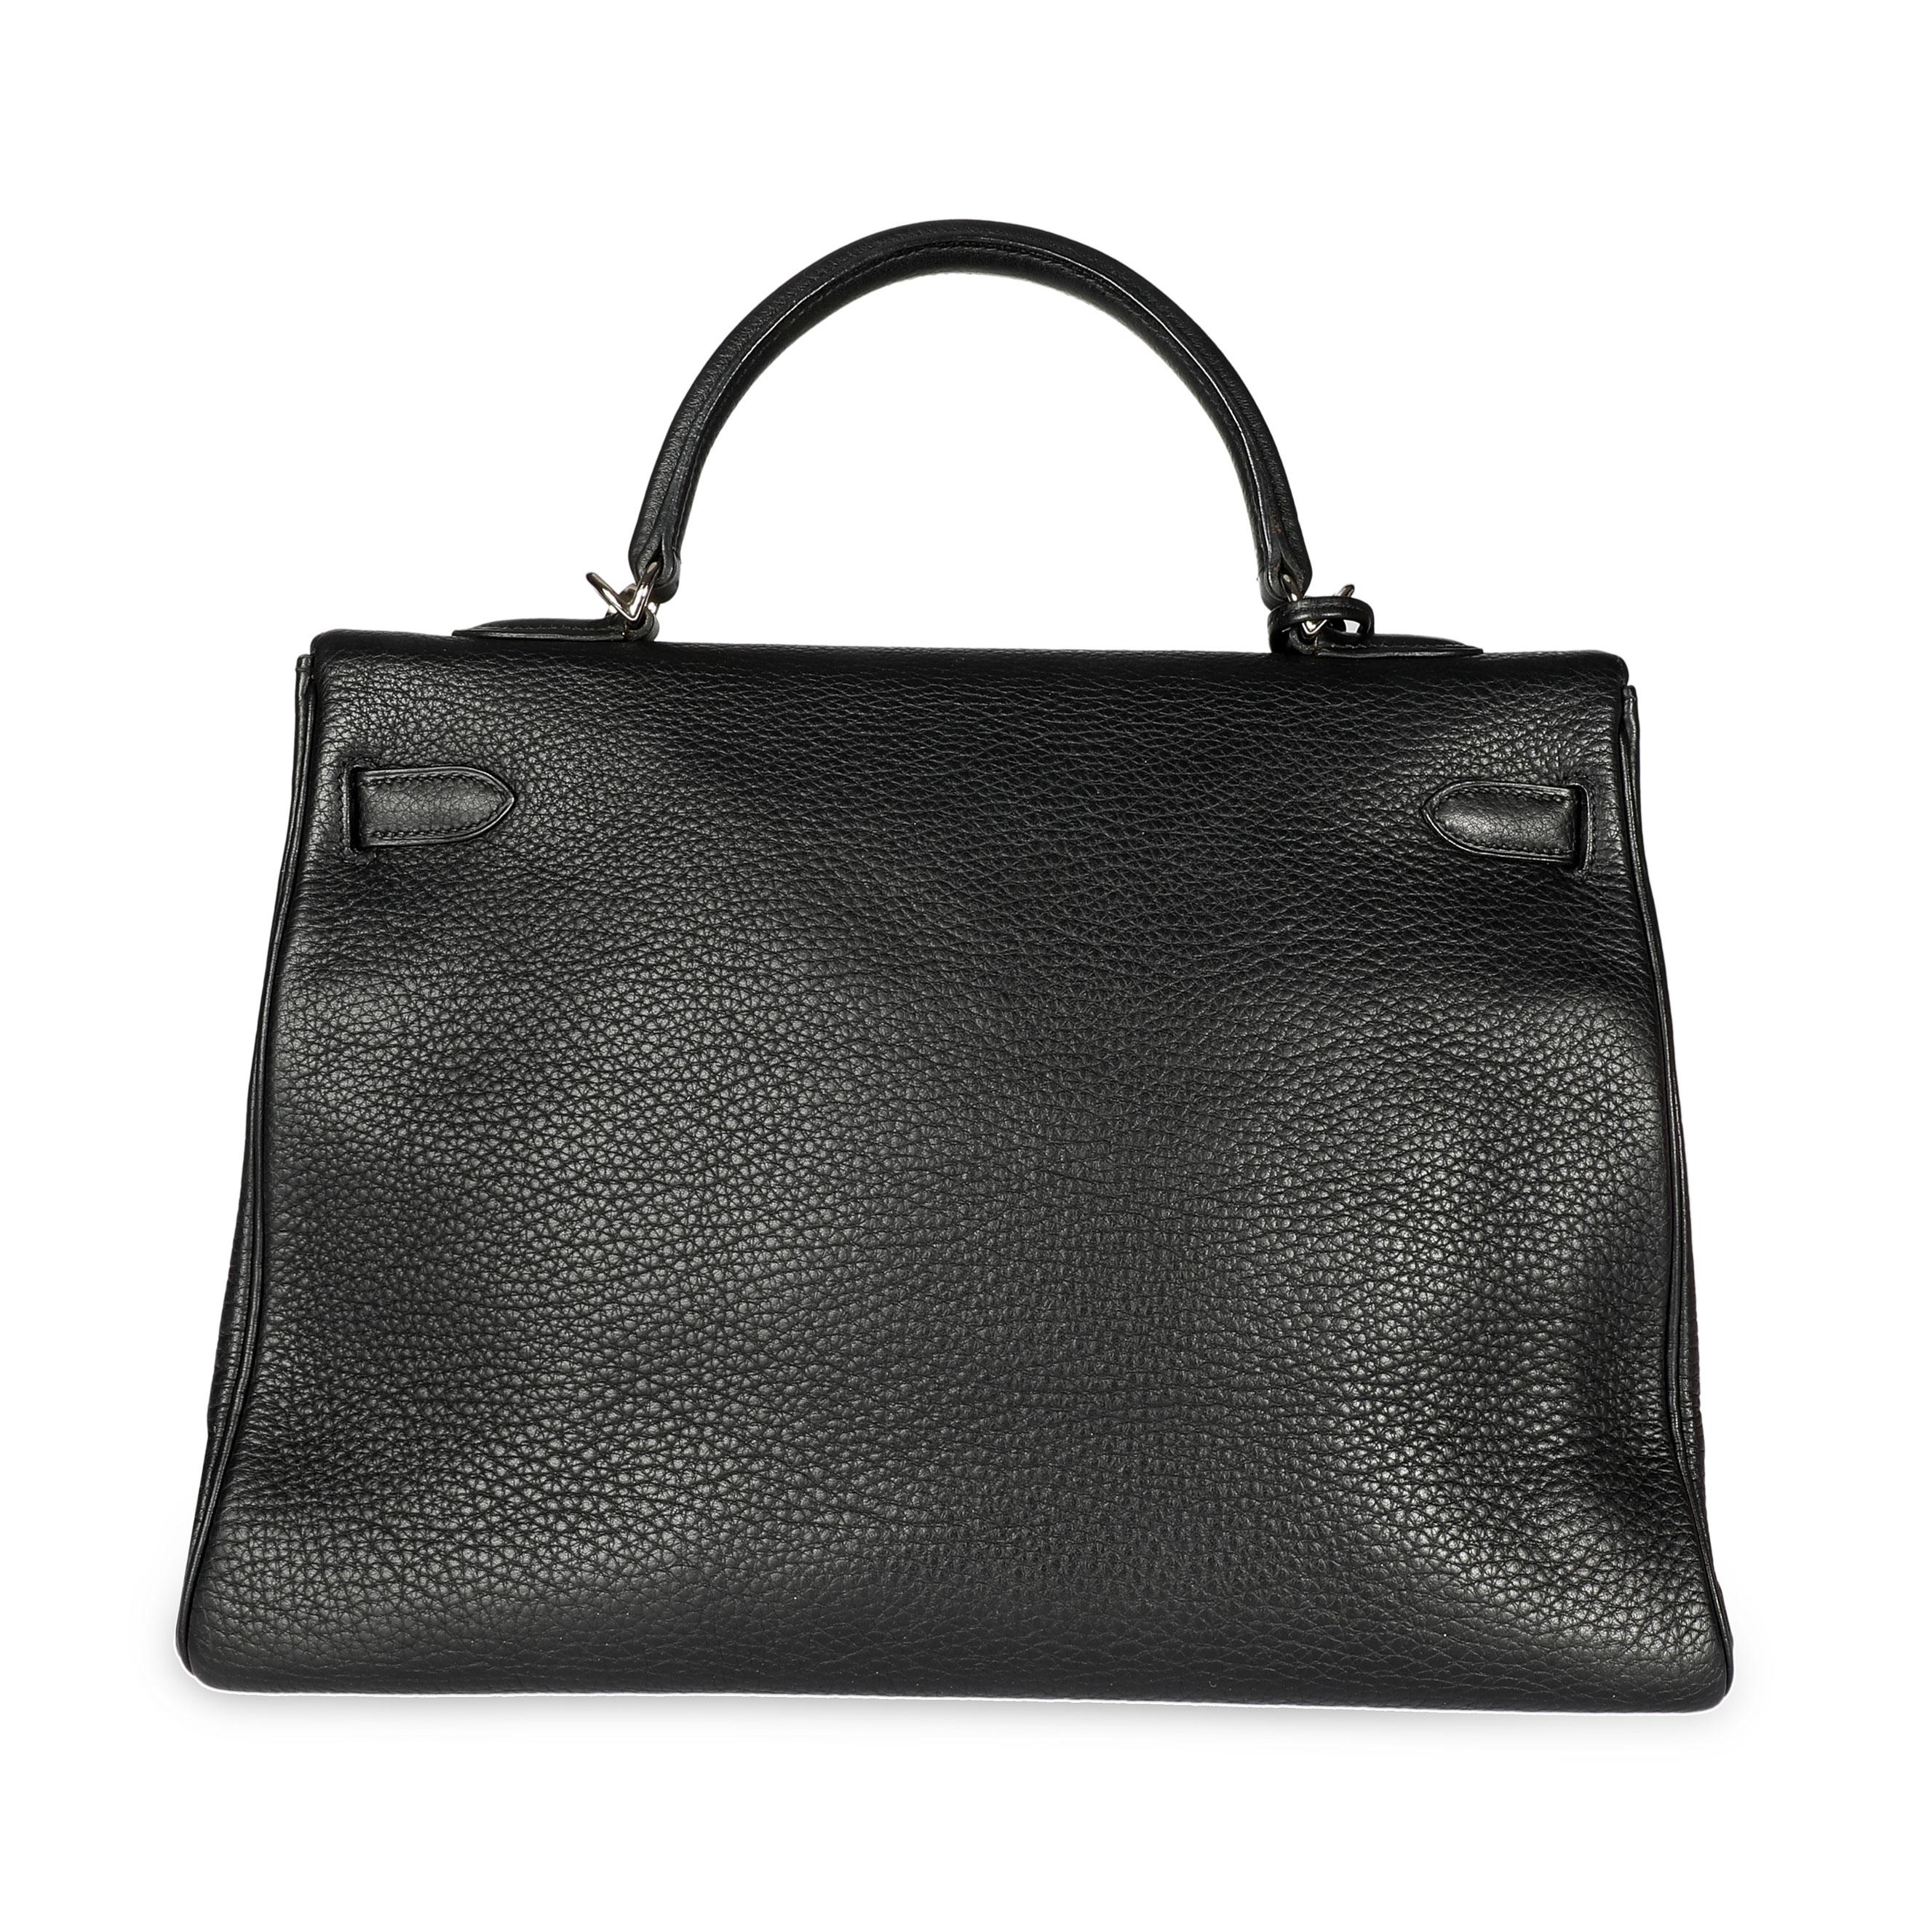 Hermès Black Clémence Retourne Kelly 35 PHW
SKU: 108488

Handbag Condition: Very Good
Condition Comments: Very Good Condition. Light scuffing to corners. Scratching and tarnishing to hardware. Marks on interior. Faint perfume odor.
Brand: